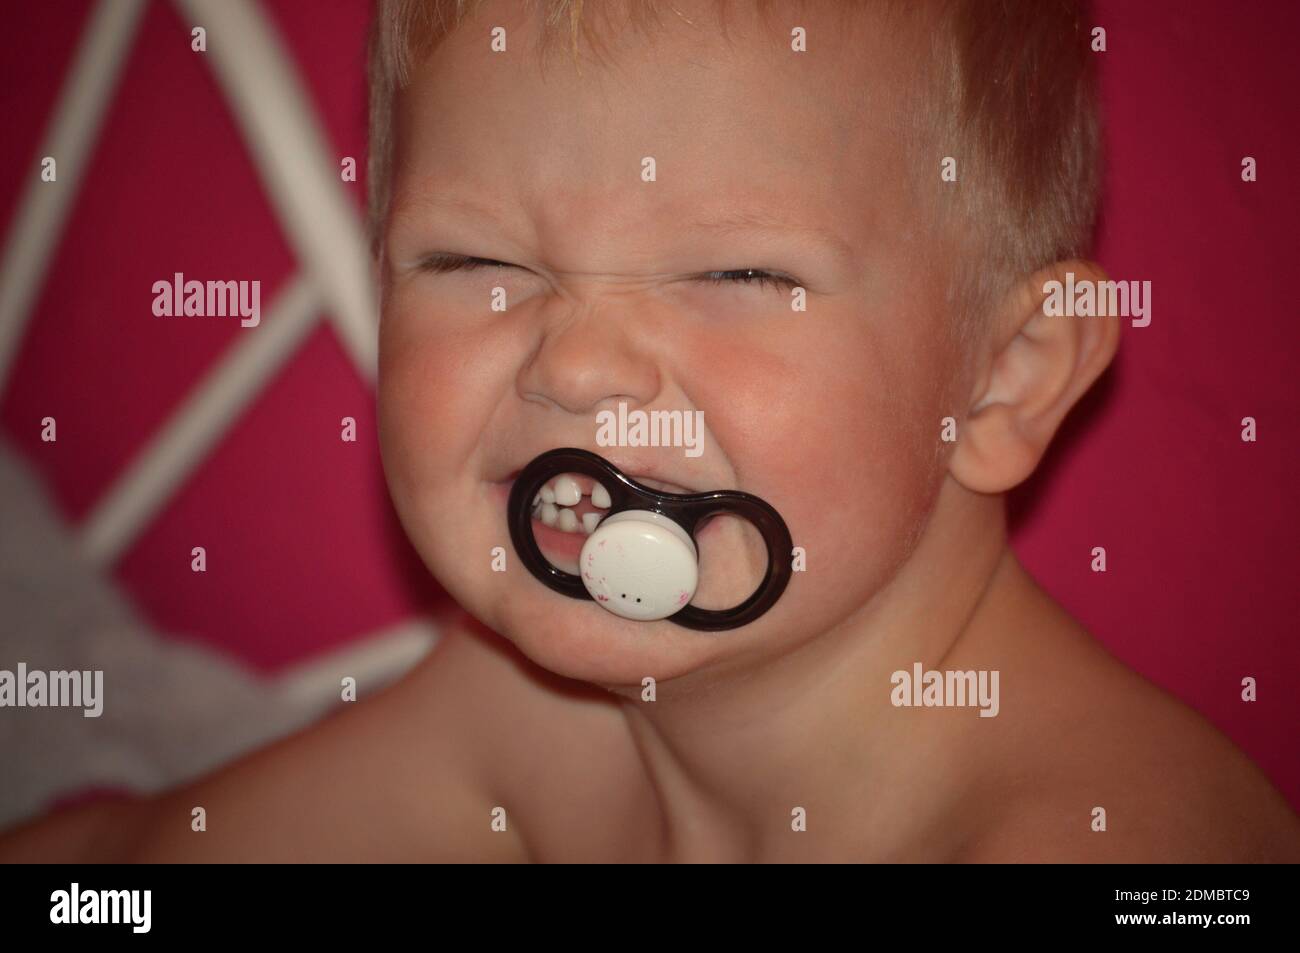 Close-up Portrait Of Boy With Pacifier In Mouth Stock Photo